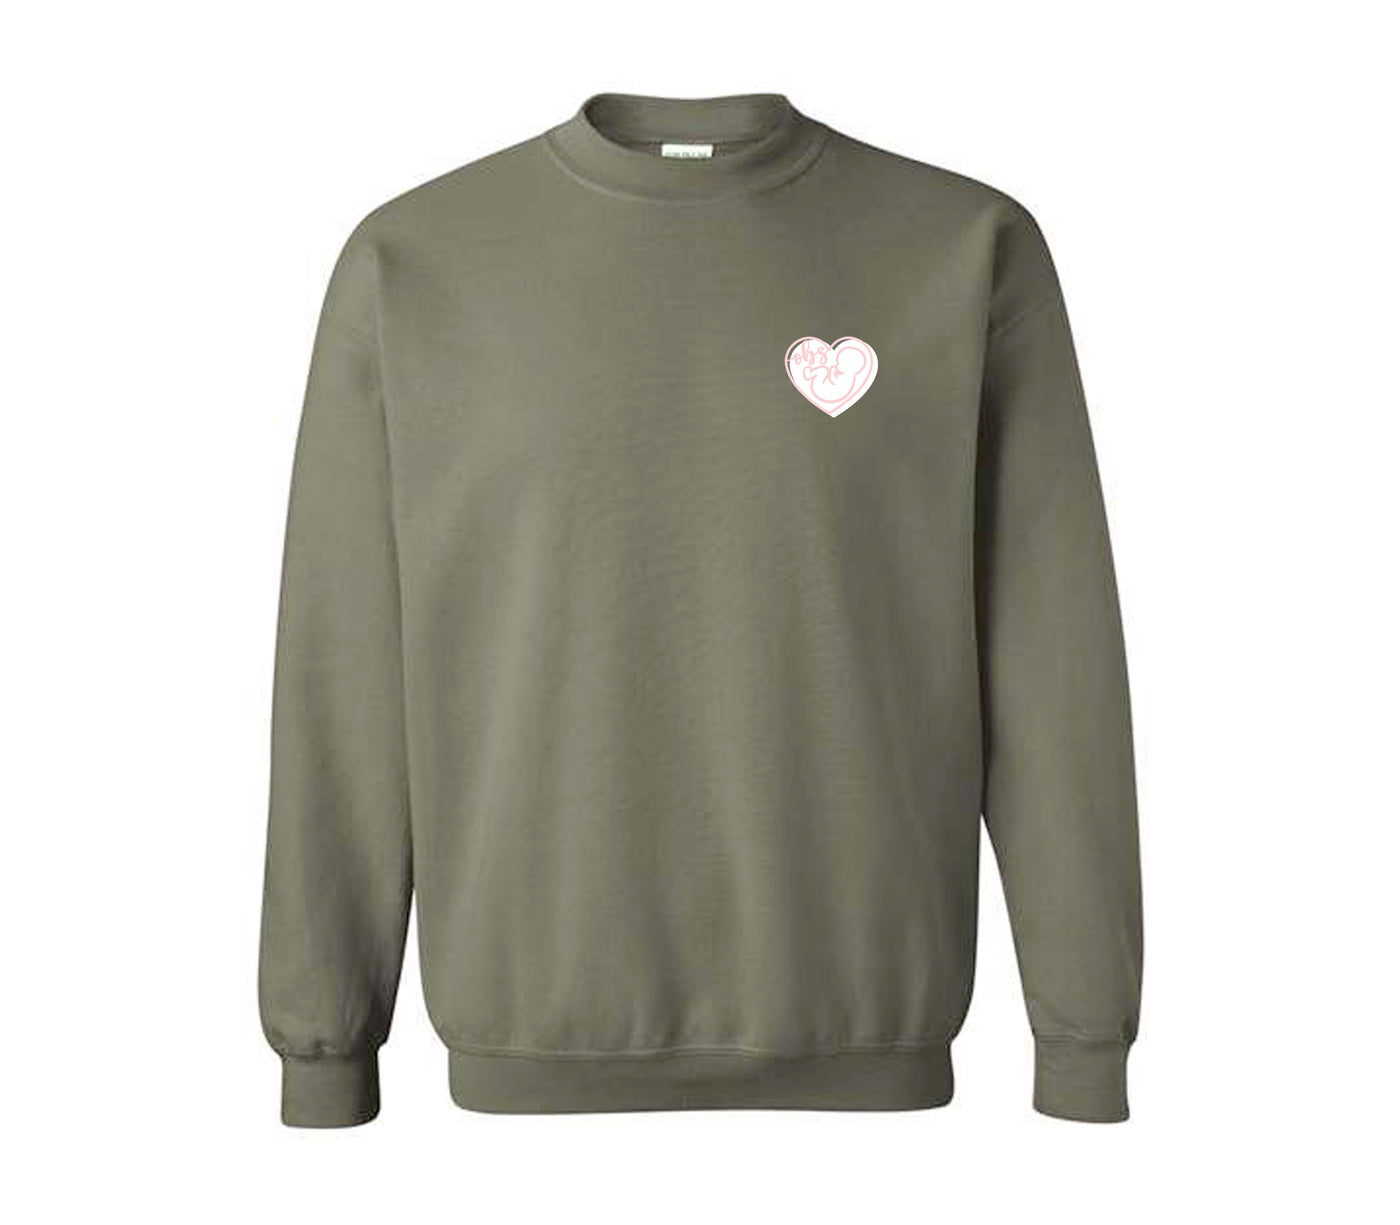 Baby in Heart - Obs - Non-Pocketed Crew Sweatshirt